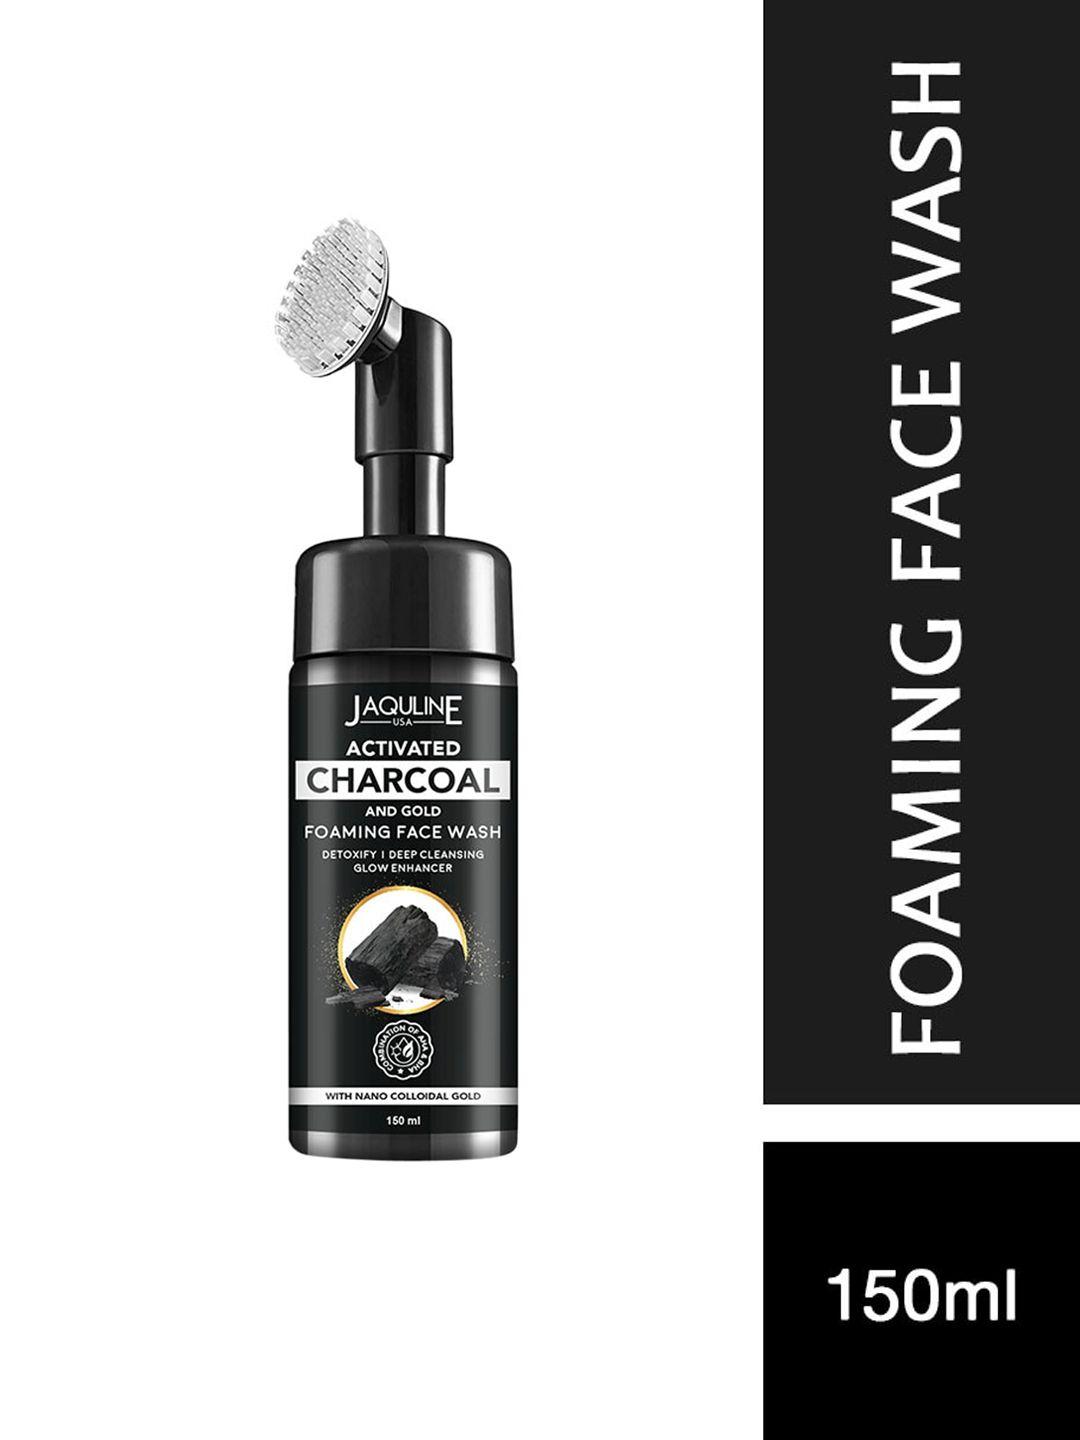 jaquline usa charcoal & gold foaming sulfate-free face wash with aha & bha - 150 ml